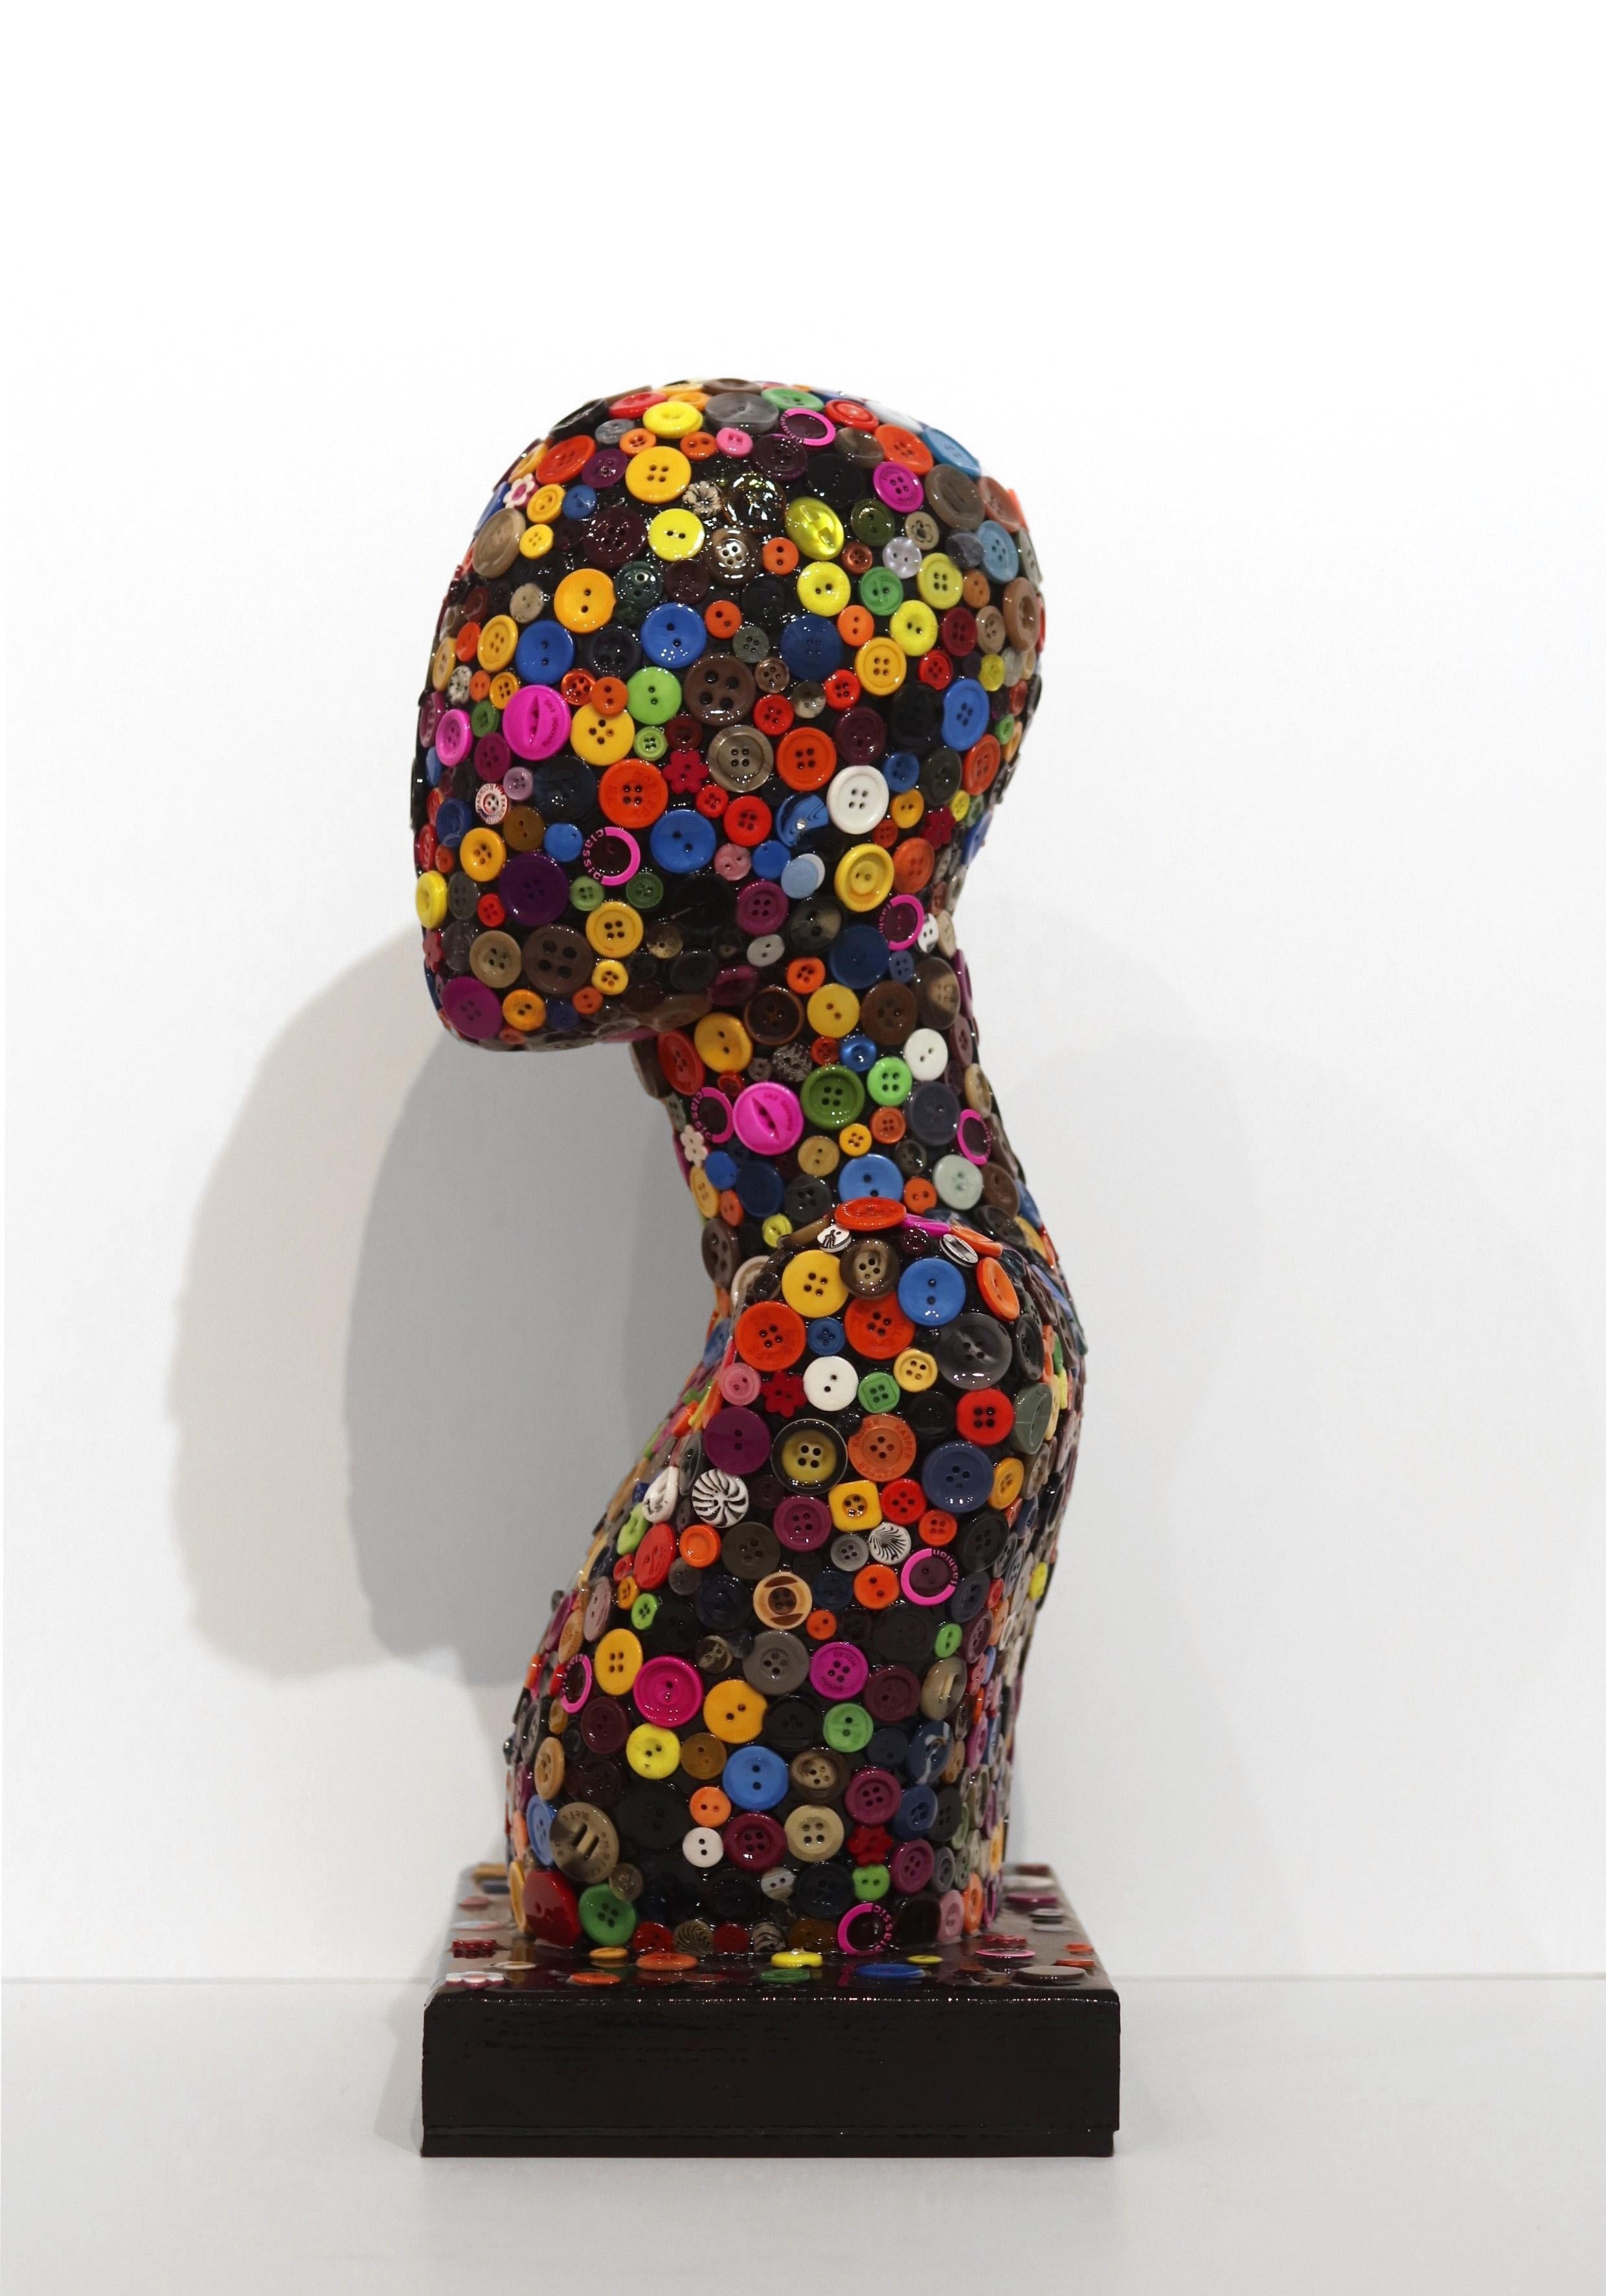 Fashionista II - Colorful Mixed Media Sculptural Artwork - Brown Figurative Sculpture by Mauro Oliveira